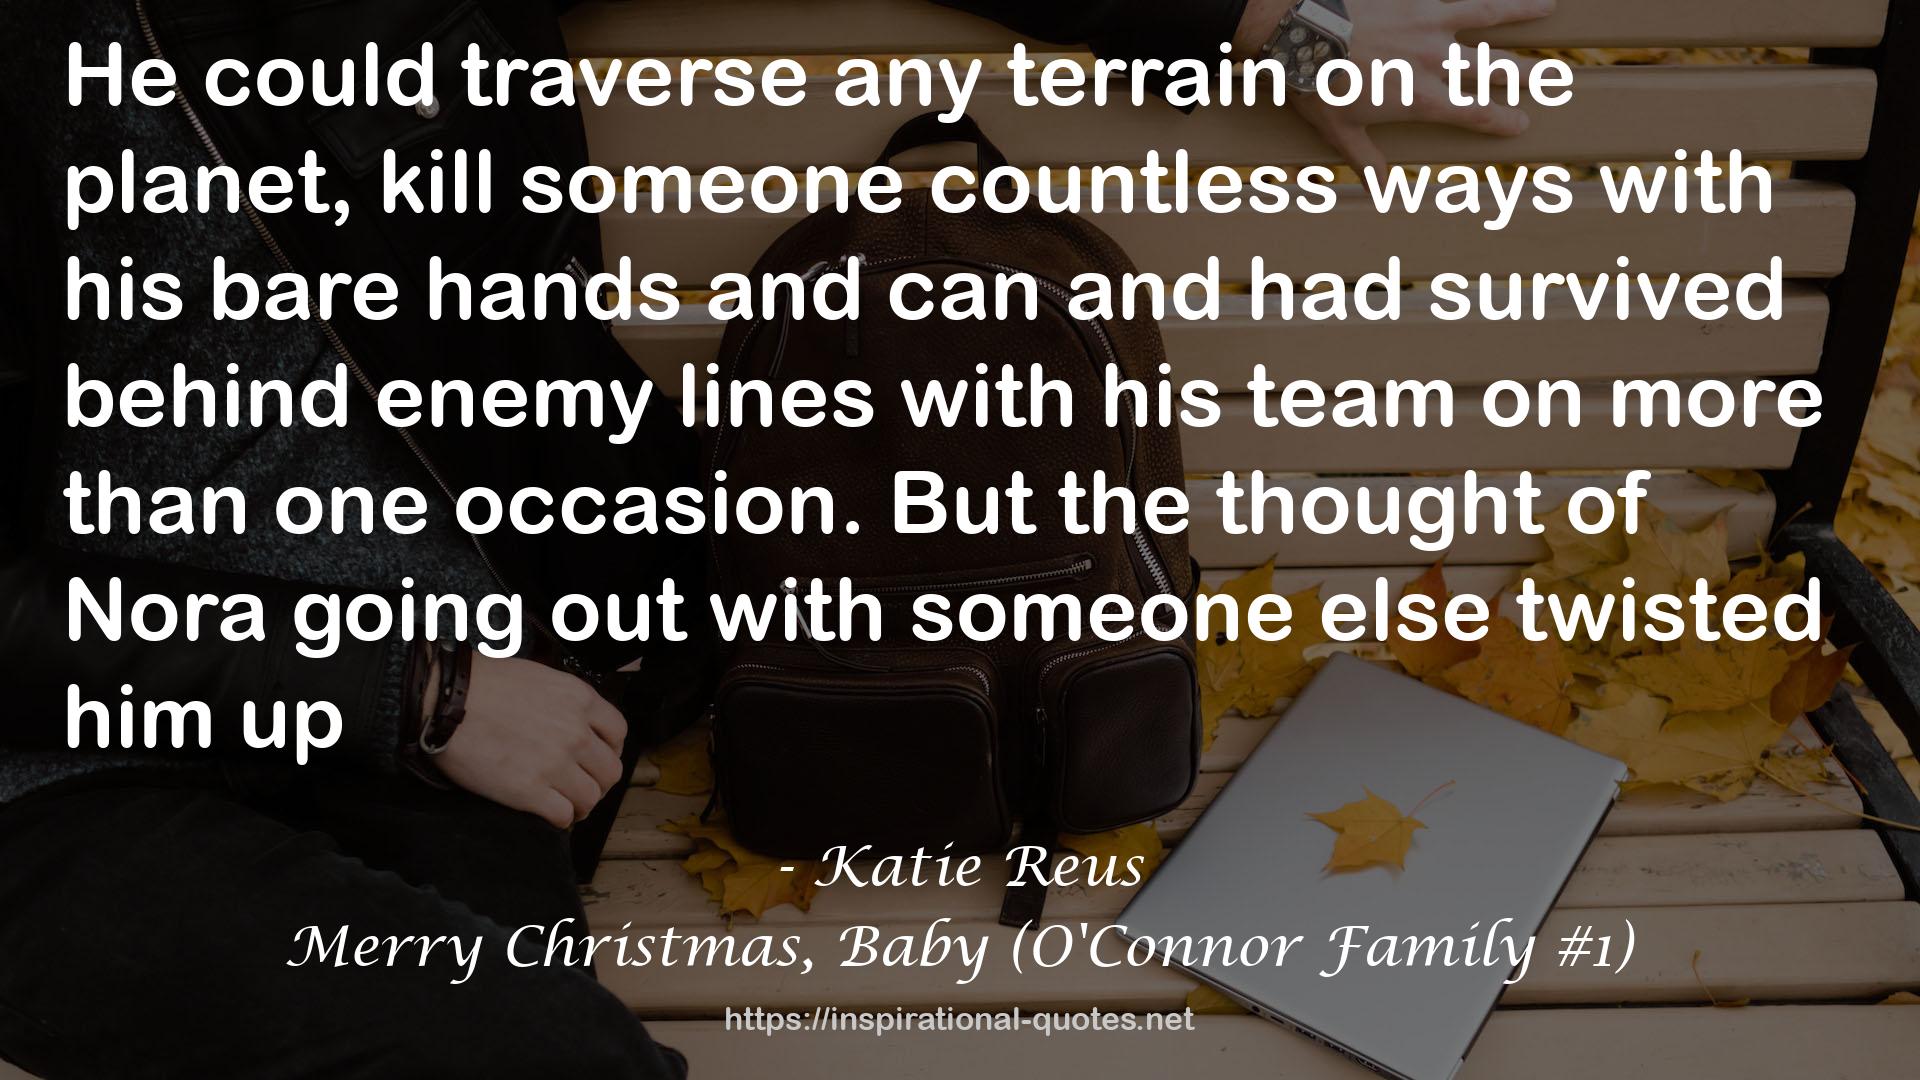 Merry Christmas, Baby (O'Connor Family #1) QUOTES